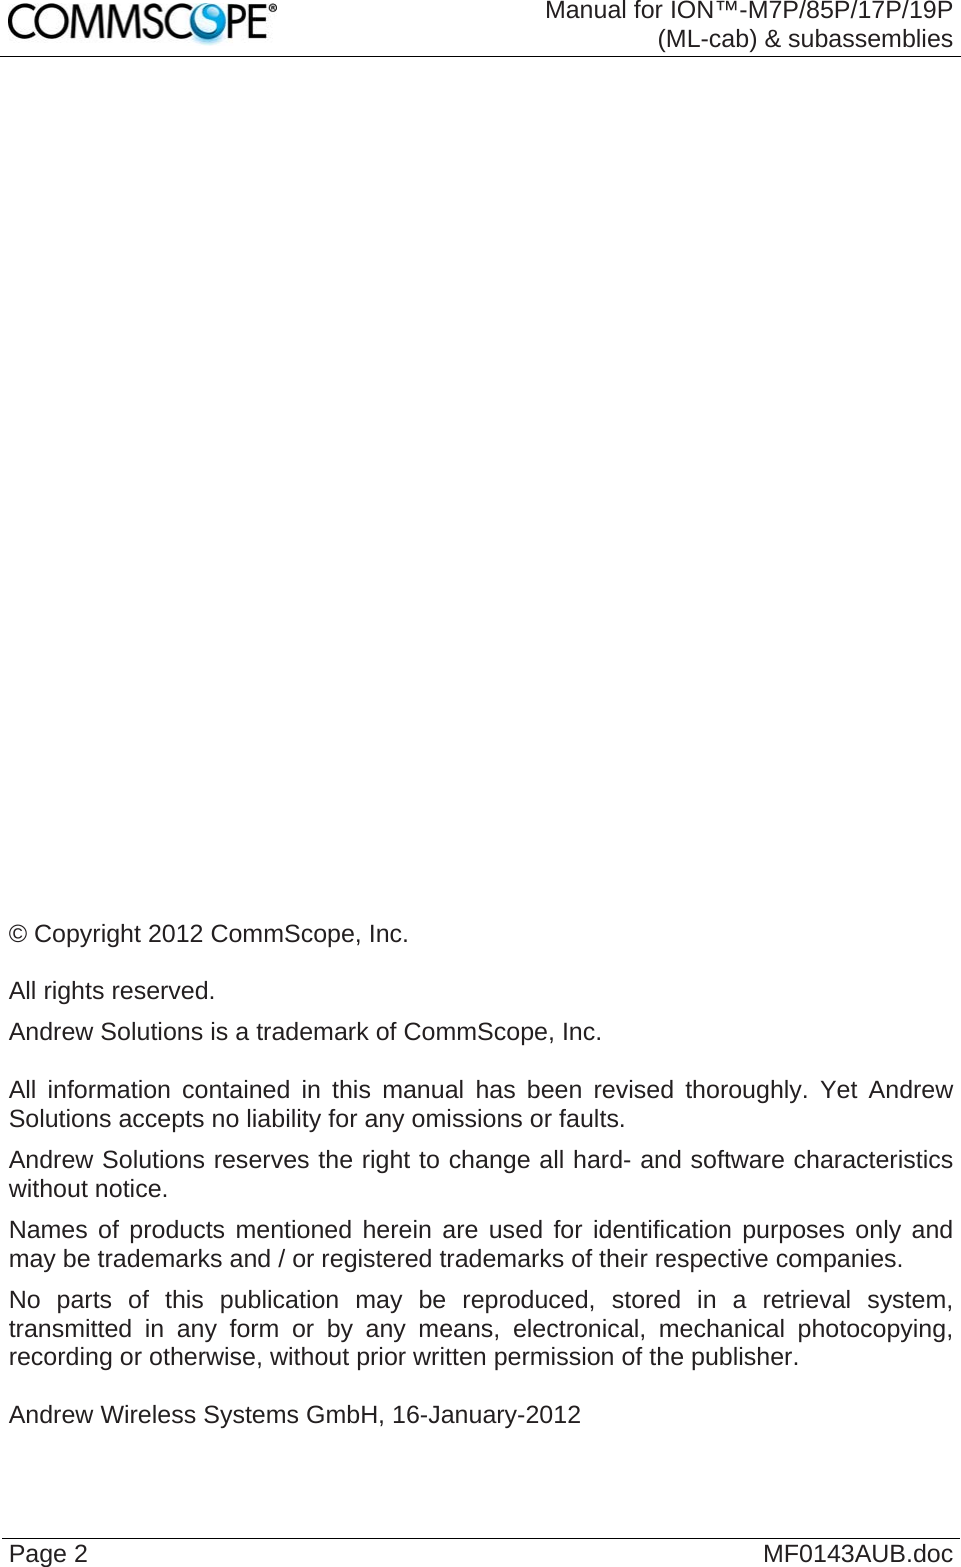  Manual for ION™-M7P/85P/17P/19P  (ML-cab) &amp; subassemblies Page 2  MF0143AUB.doc                              © Copyright 2012 CommScope, Inc.  All rights reserved. Andrew Solutions is a trademark of CommScope, Inc.  All information contained in this manual has been revised thoroughly. Yet Andrew Solutions accepts no liability for any omissions or faults. Andrew Solutions reserves the right to change all hard- and software characteristics without notice. Names of products mentioned herein are used for identification purposes only and may be trademarks and / or registered trademarks of their respective companies. No parts of this publication may be reproduced, stored in a retrieval system, transmitted in any form or by any means, electronical, mechanical photocopying, recording or otherwise, without prior written permission of the publisher.  Andrew Wireless Systems GmbH, 16-January-2012 